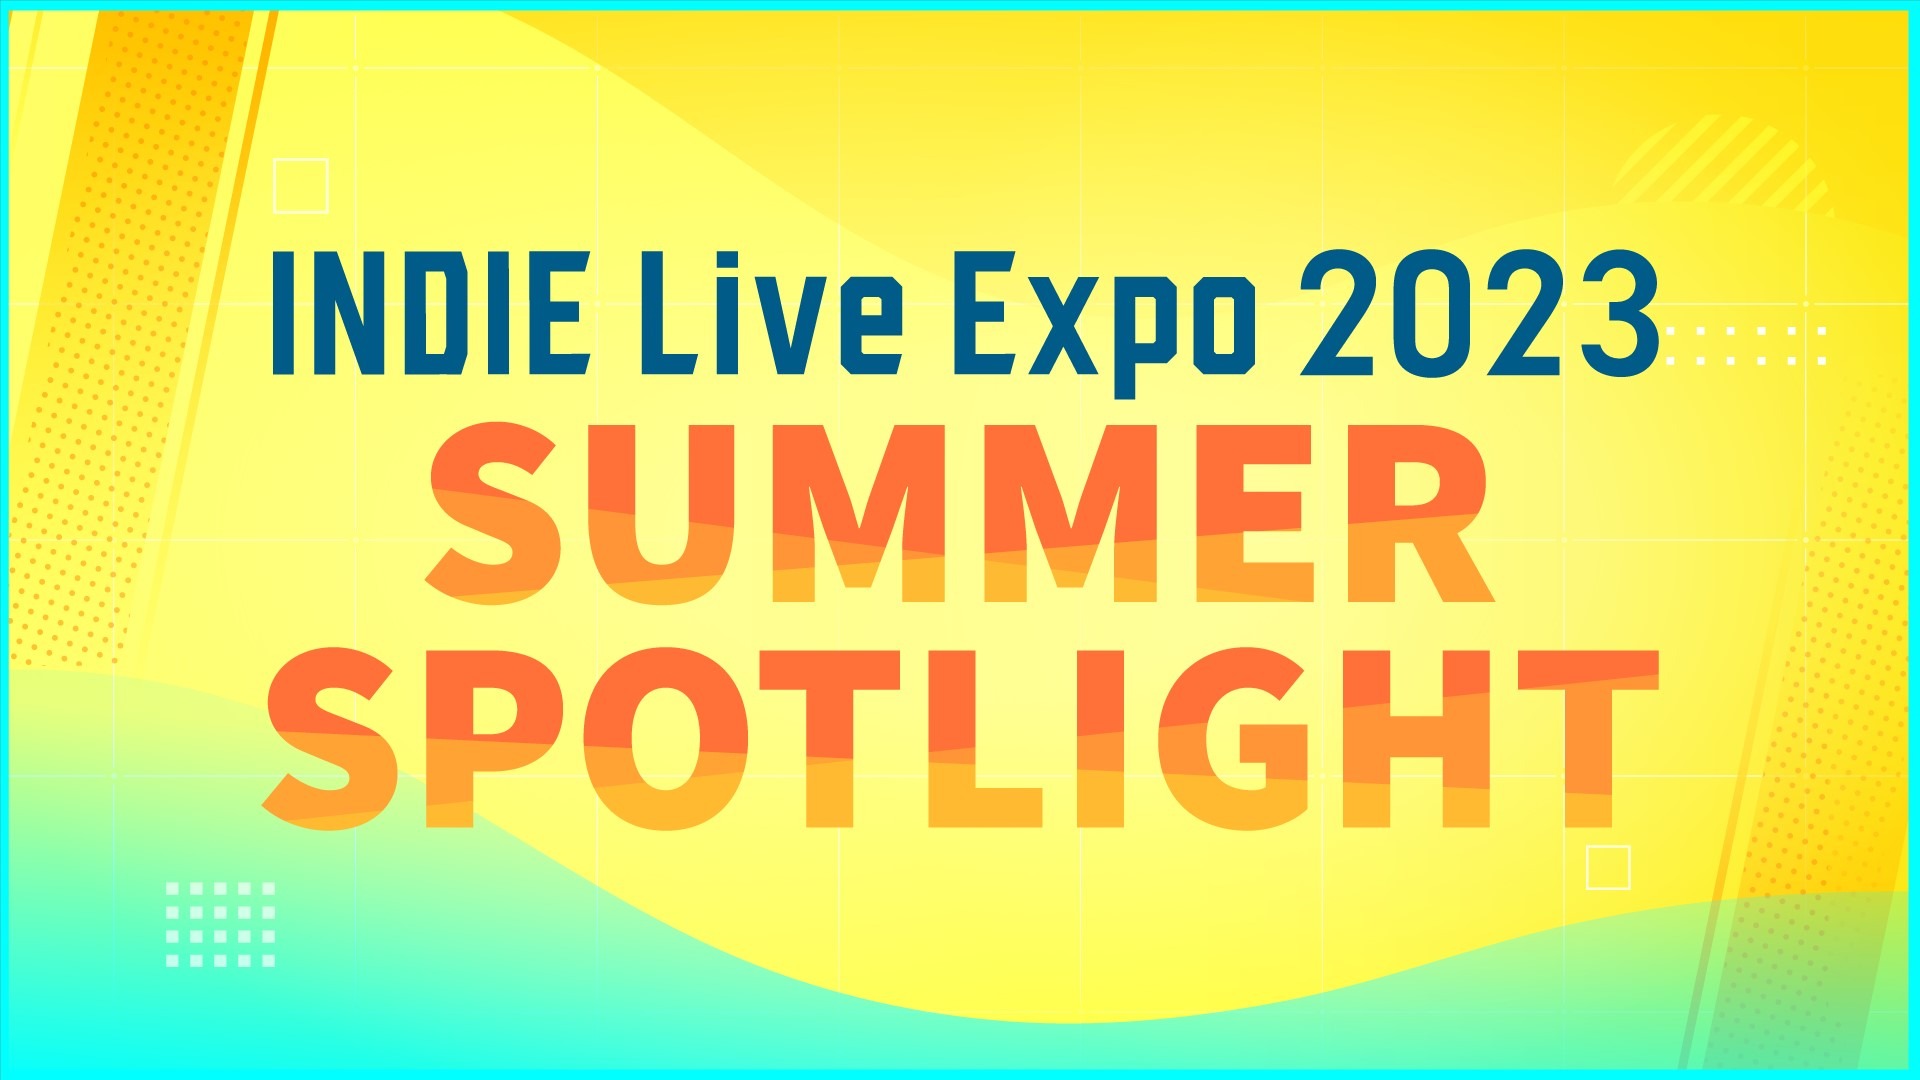 6 Games We Saw At Indie Live Expo 2023 That We’re Excited About